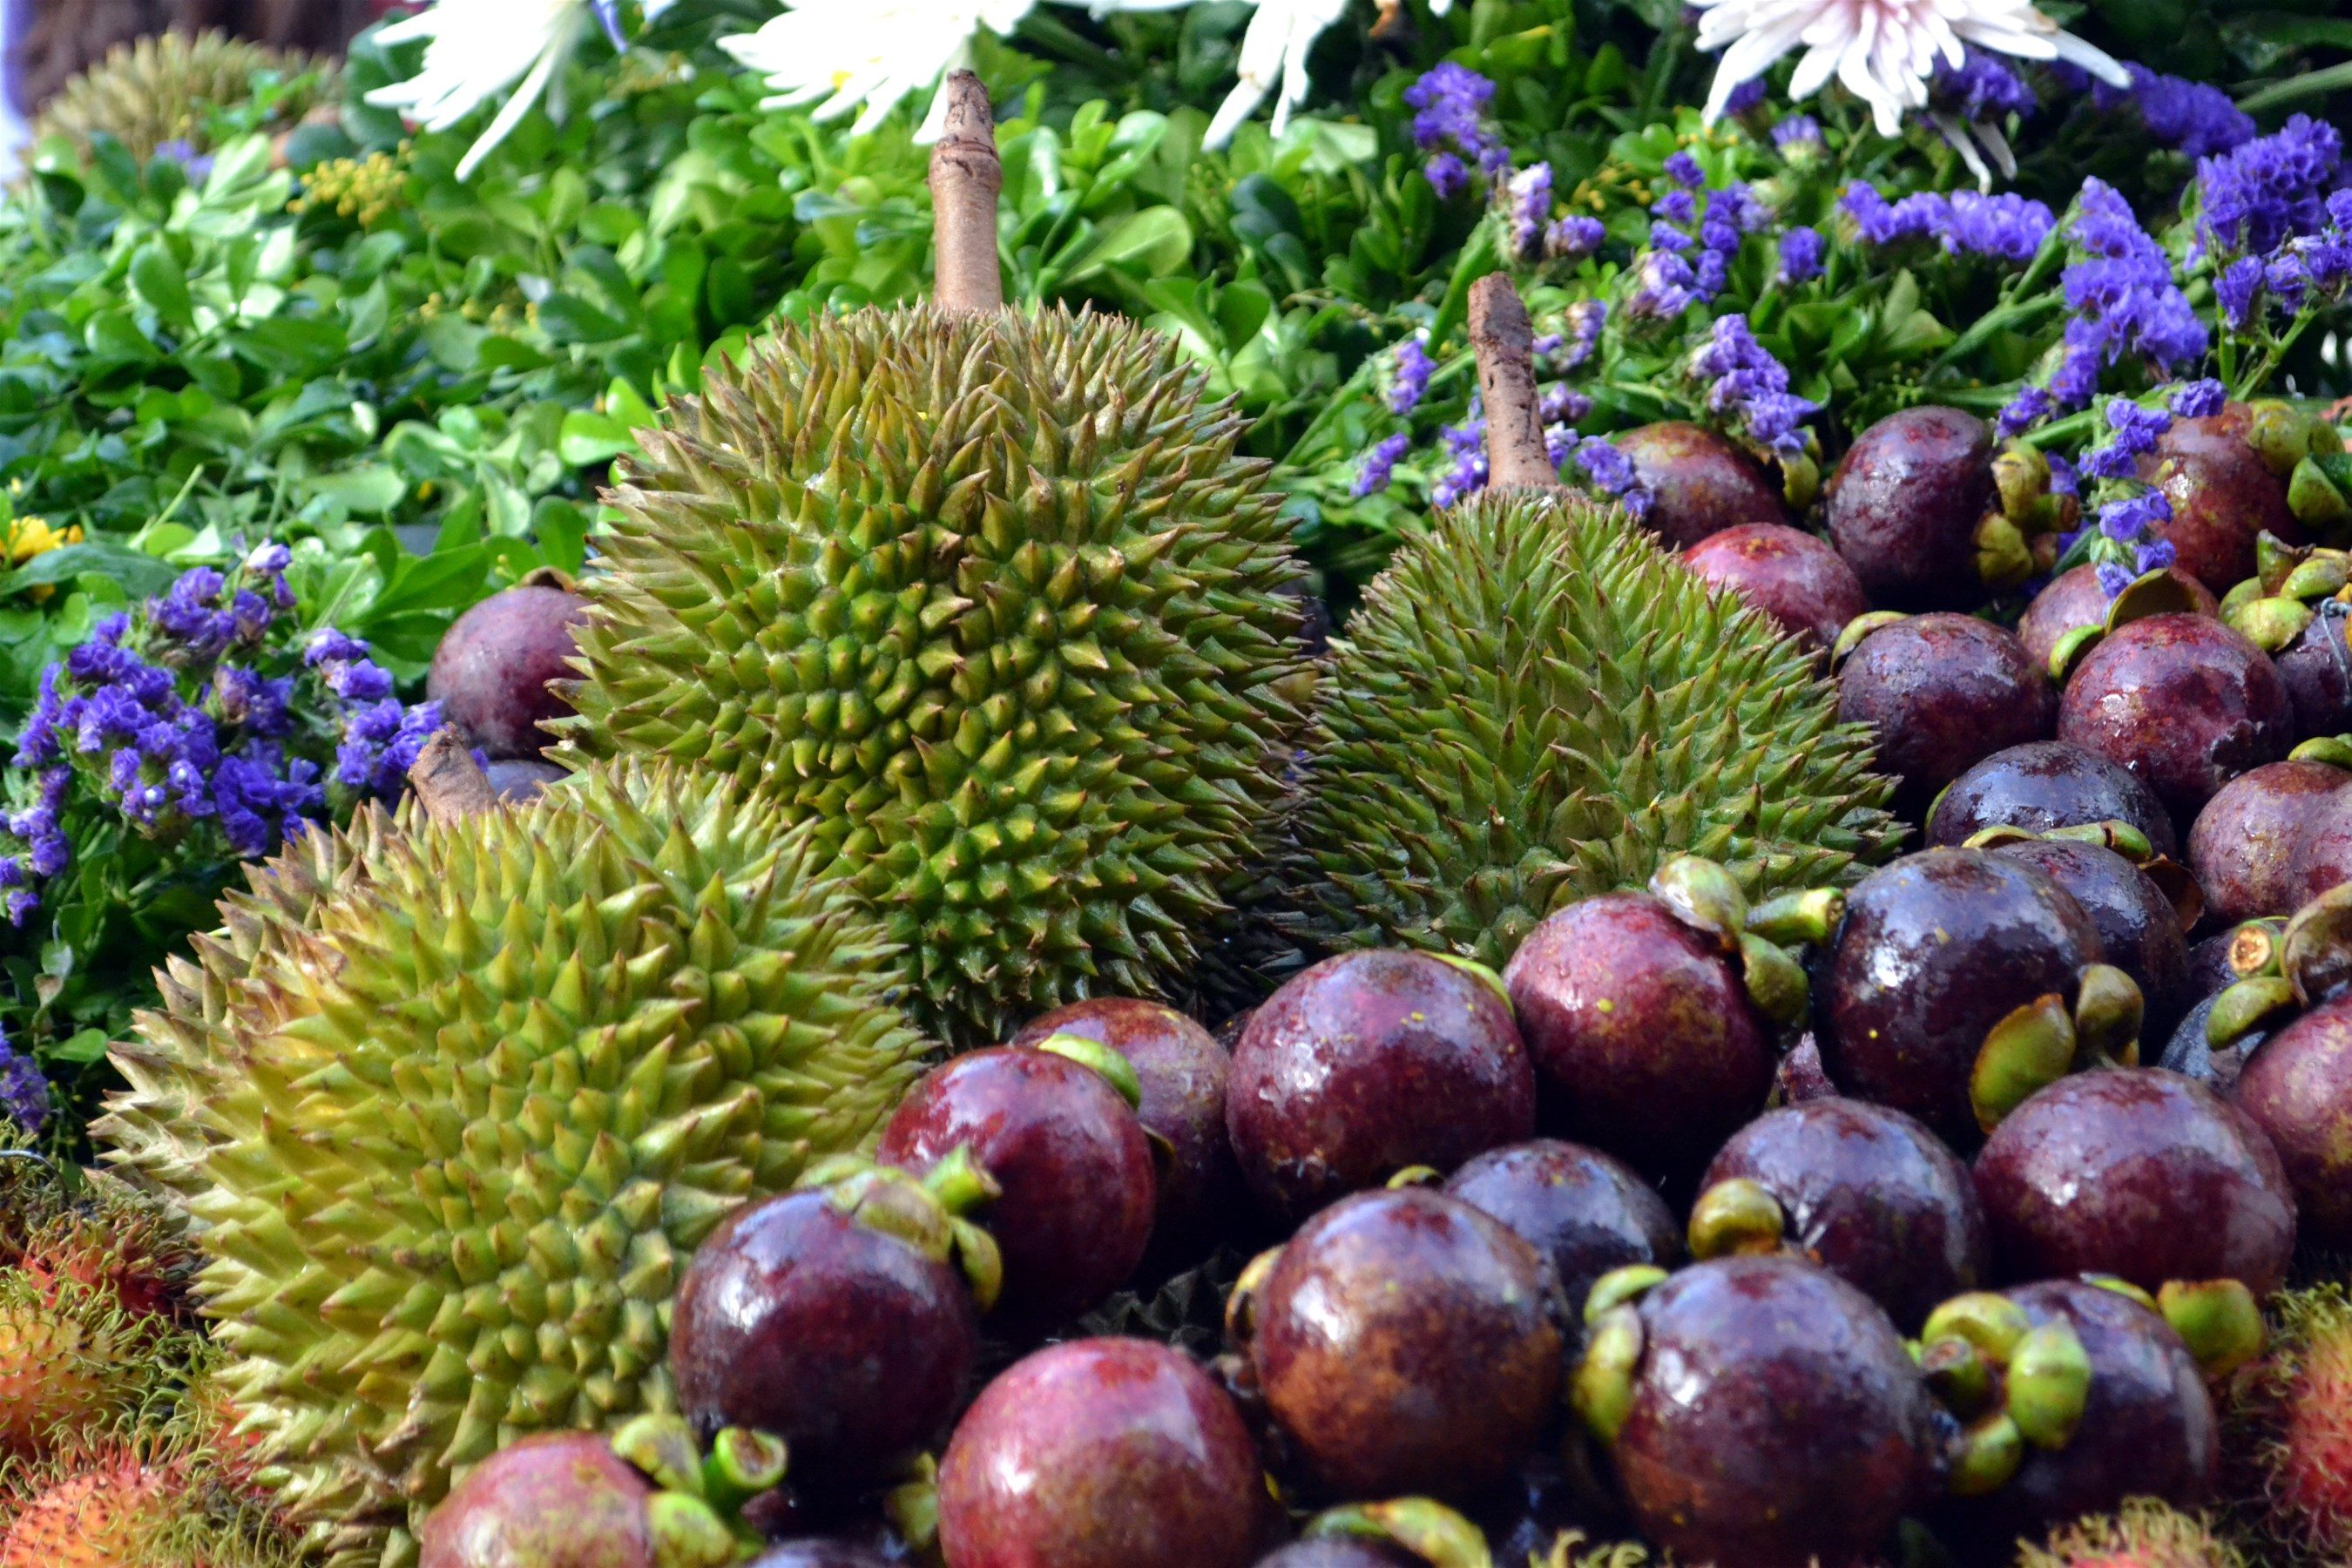 Durian and mangosteen, the king and queen of tropical fruits, respectively. Photo by Henrylito D. Tacio 